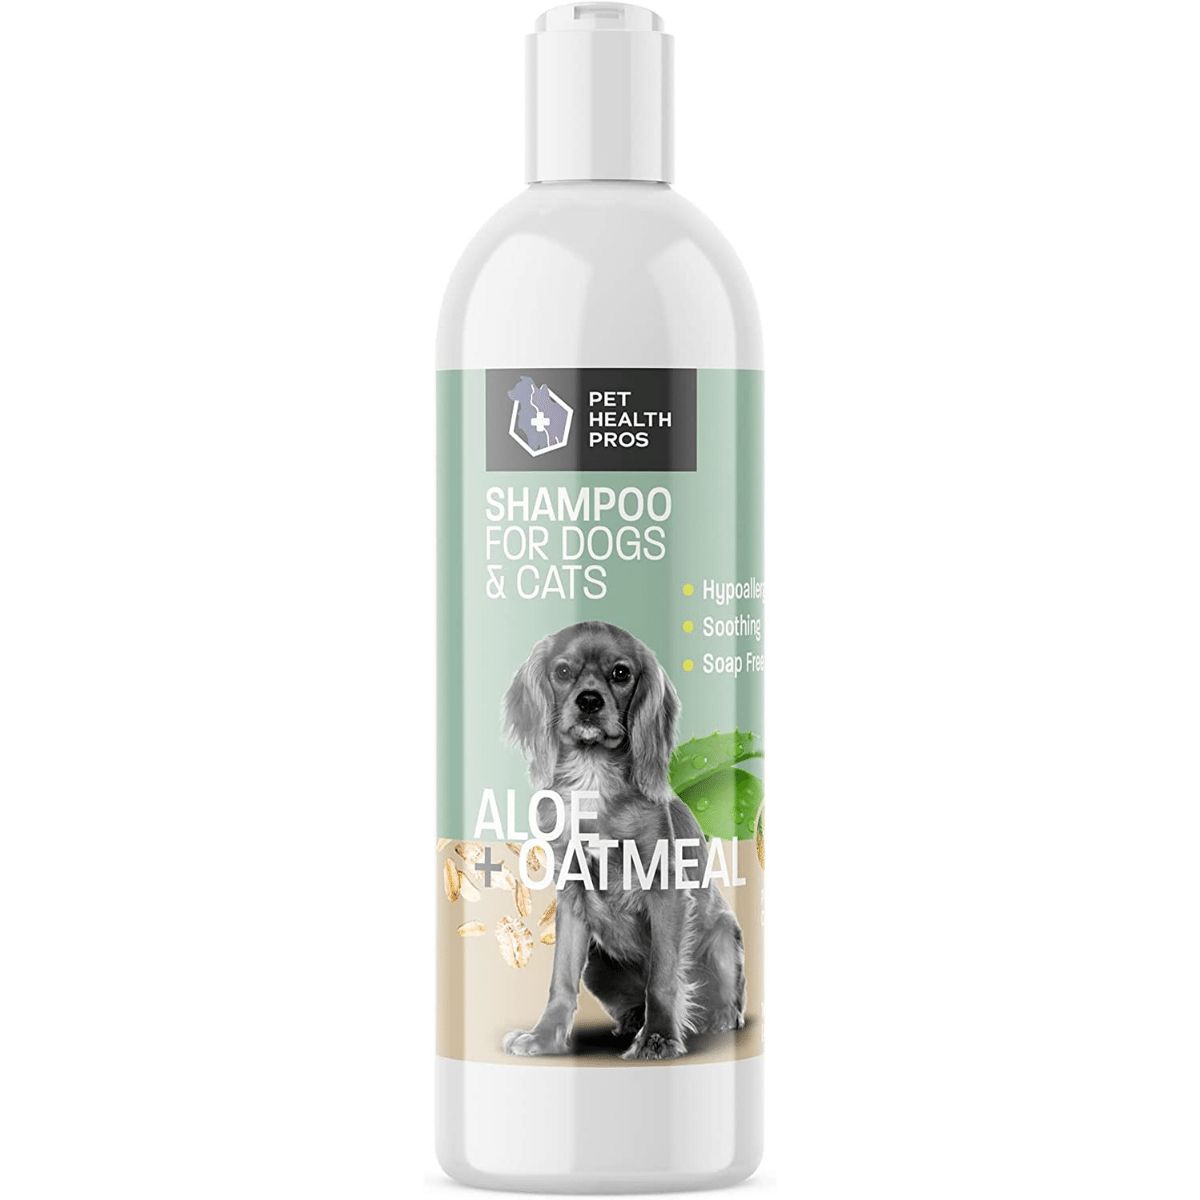 Aloe Oatmeal Shampoo for Dogs - Sensitive Skin Shampoo for Allergies and Itching